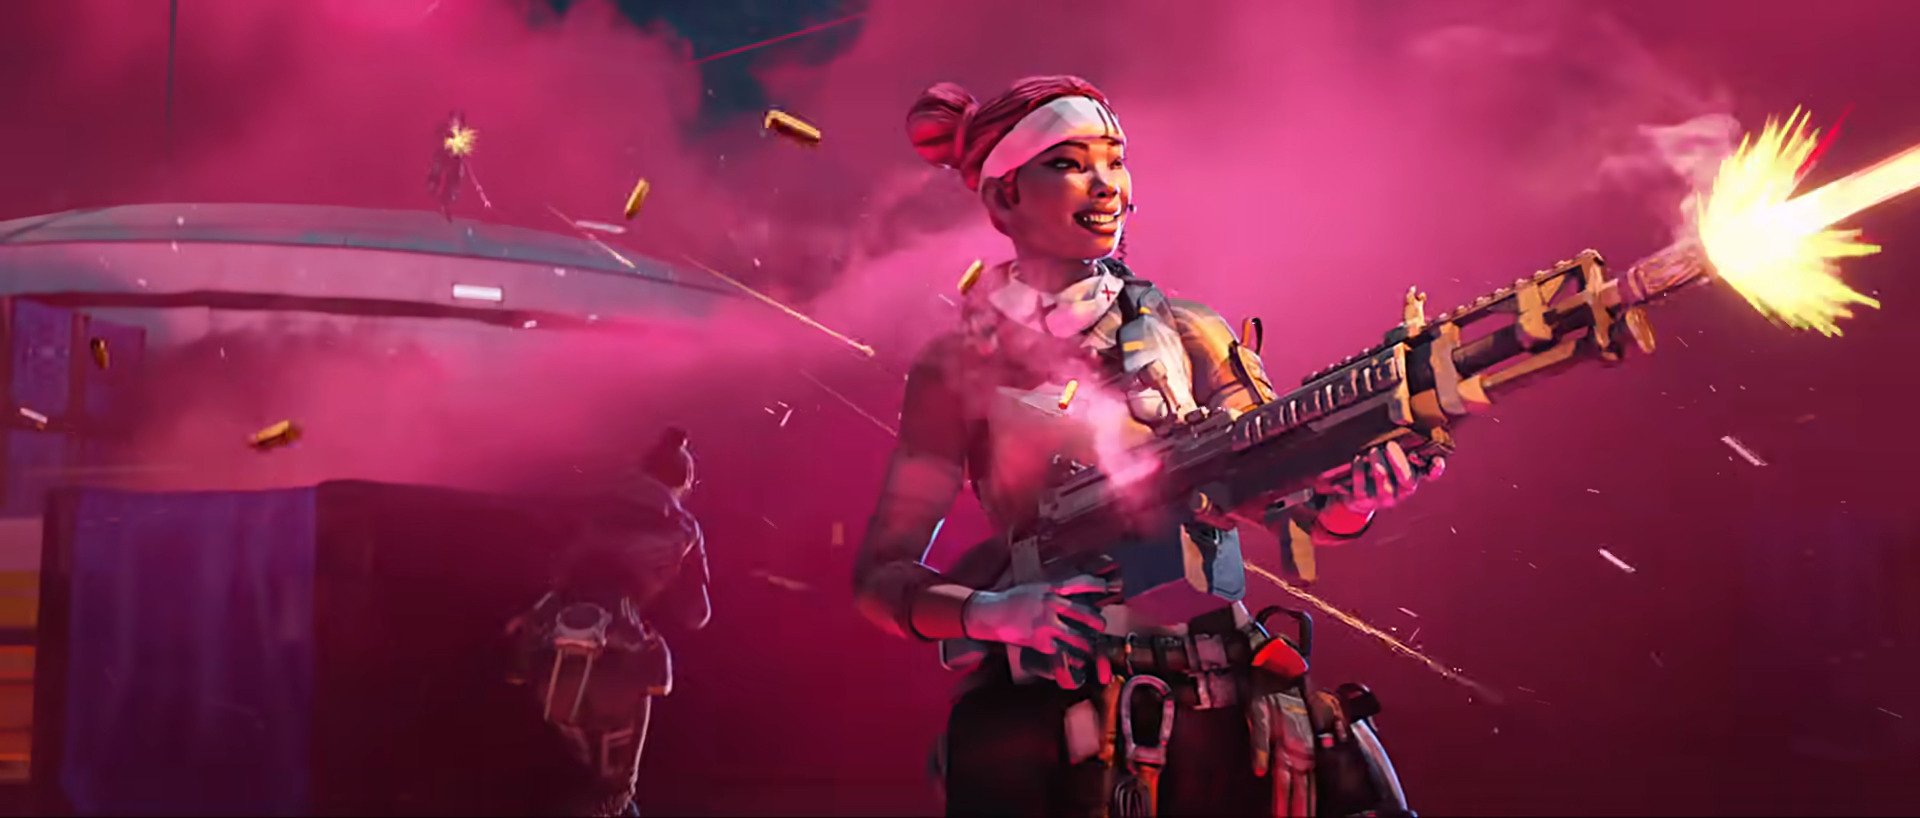 Apex Legends Available Now On Steam While 419 Top Players Banned For Smurfing Exploits